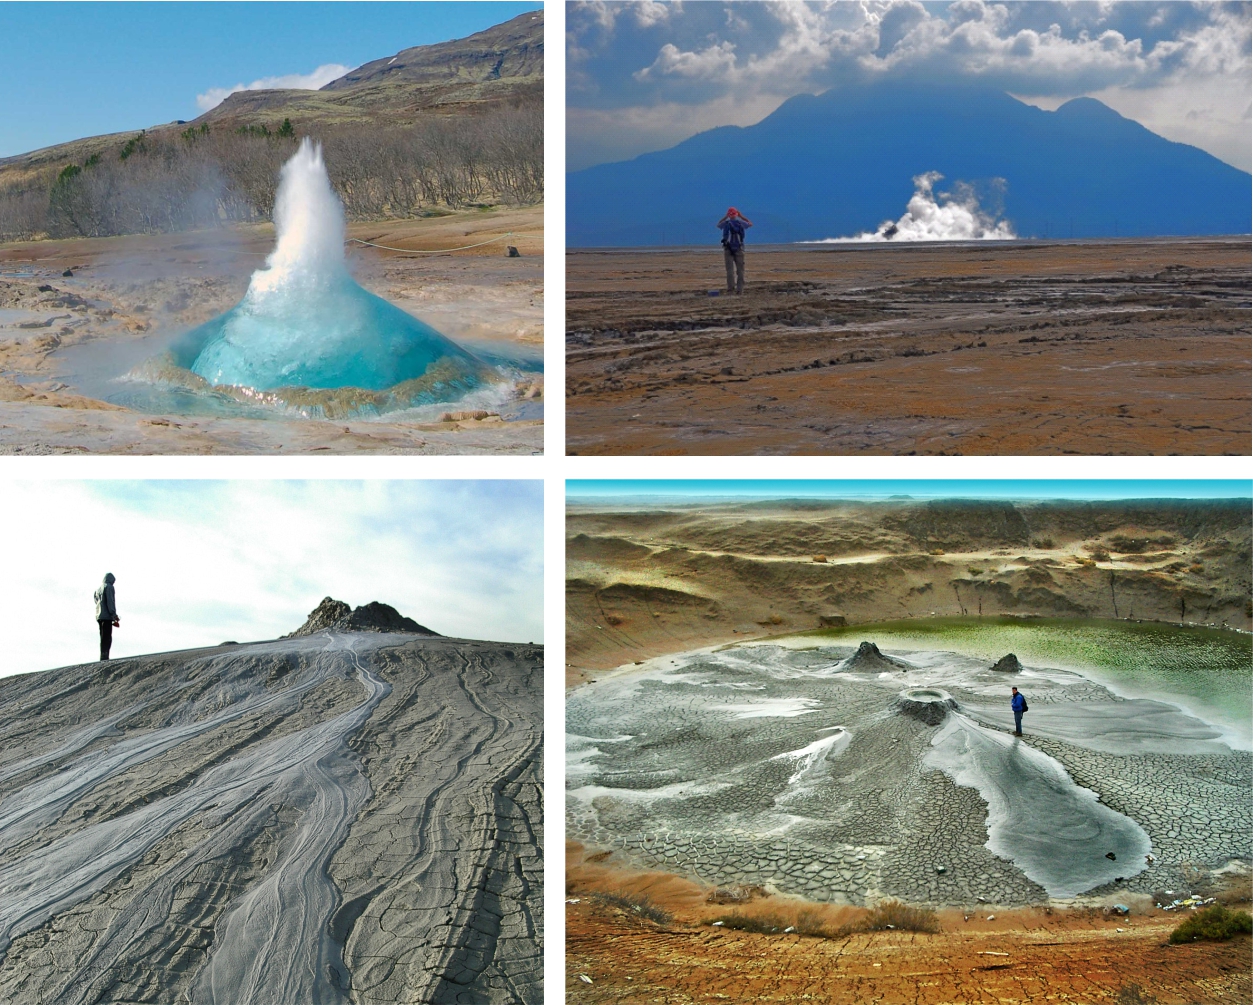 Geological sites. Photos: Adriano Mazzini and others, the HOTMUD-projects